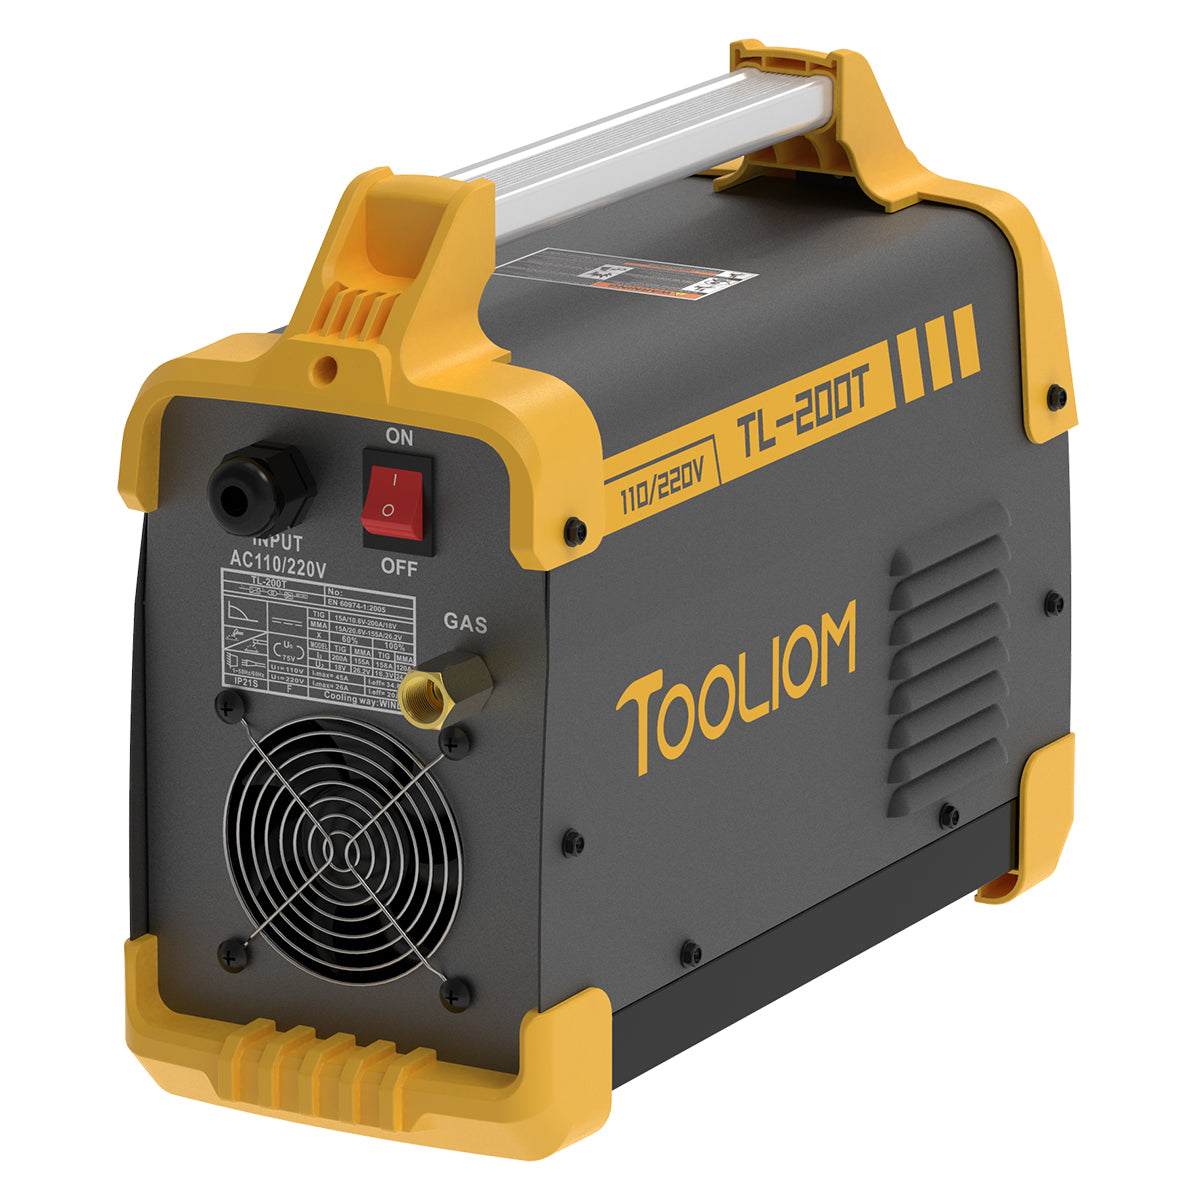 TIG/Stick High Frequency Dual Voltage TL-200T 2 in 1 Welding Machine